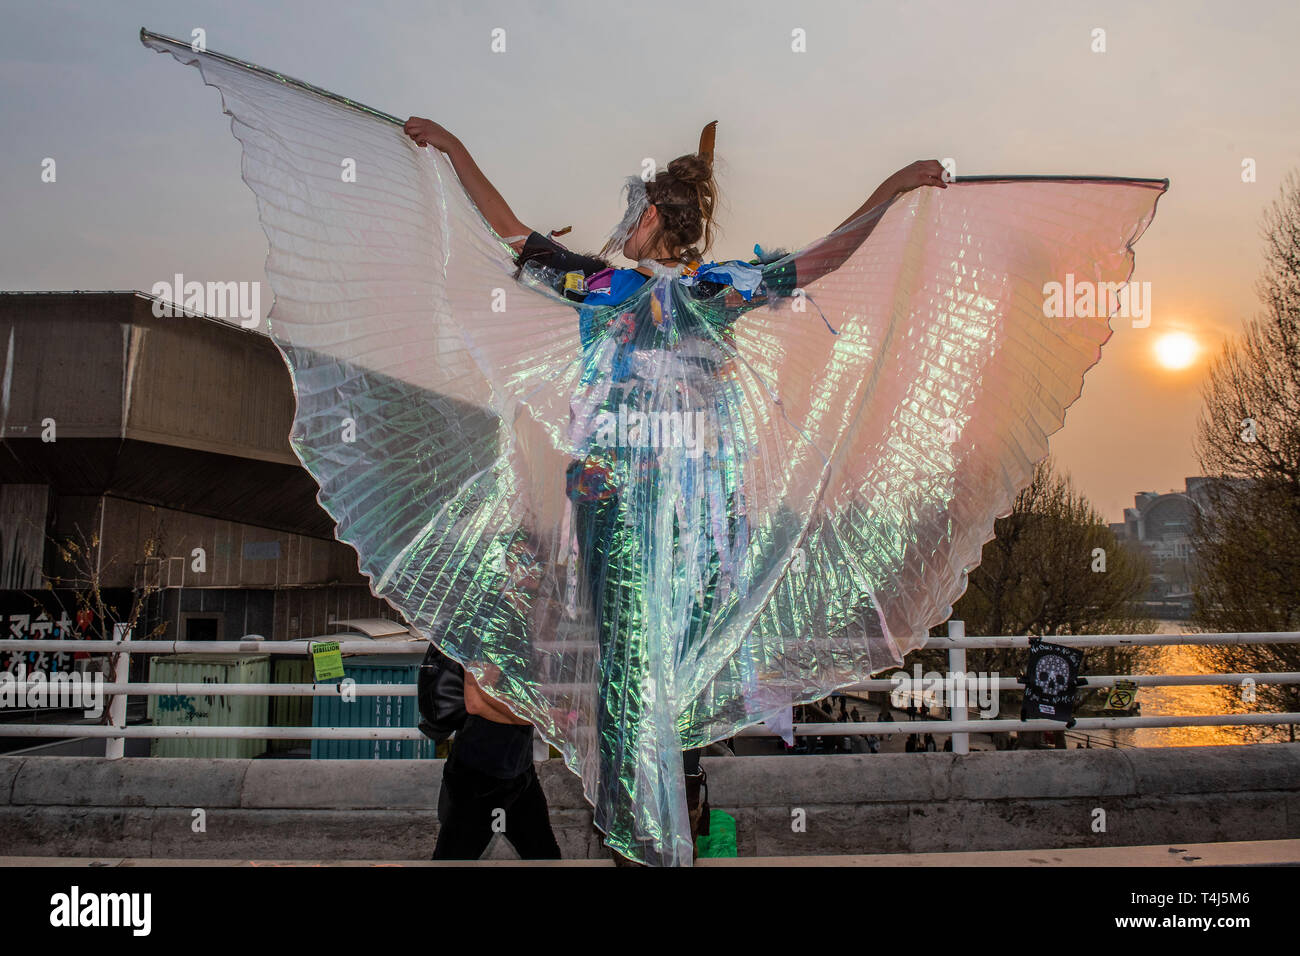 London, UK. 17th Apr, 2019. Dancers with dresses made out the plastic waste that is now being found in sea birds - The evening generally has a festival atmosphere - Day 3 - Protestors from Extinction Rebellion block several junctions in London as part of their ongoing protest to demand action by the UK Government on the 'climate chrisis'. The action is part of an international co-ordinated protest. Credit: Guy Bell/Alamy Live News Stock Photo